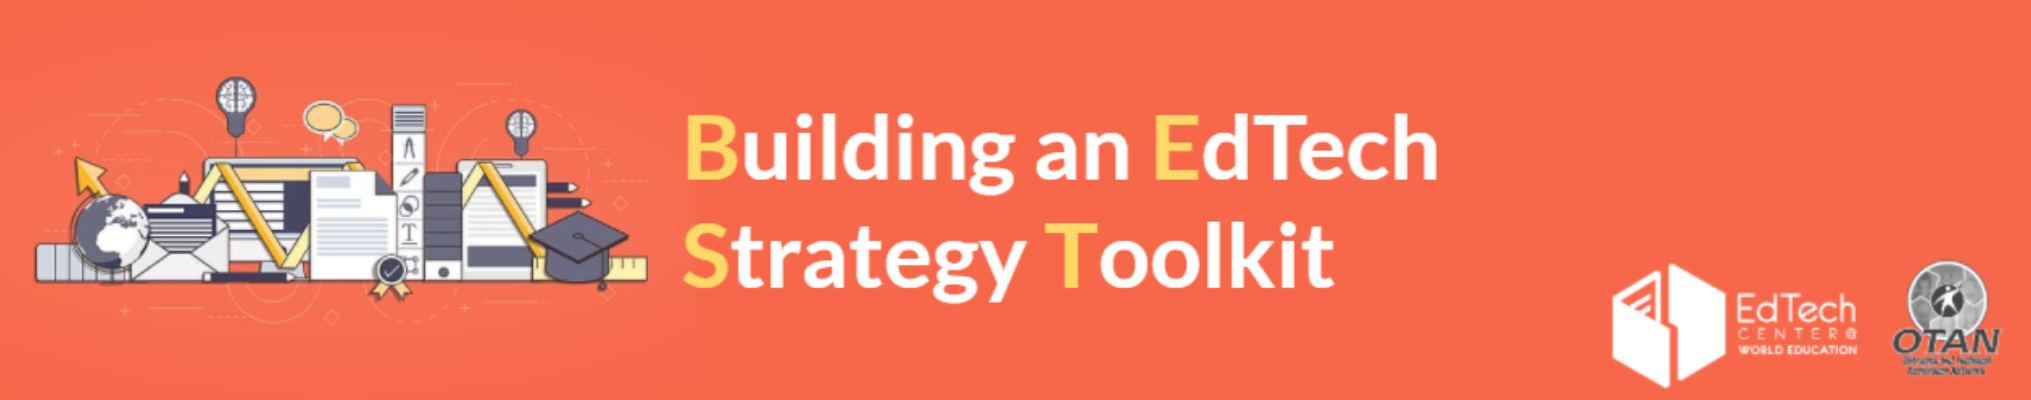 Building an EdTech Strategy Toolkit banner